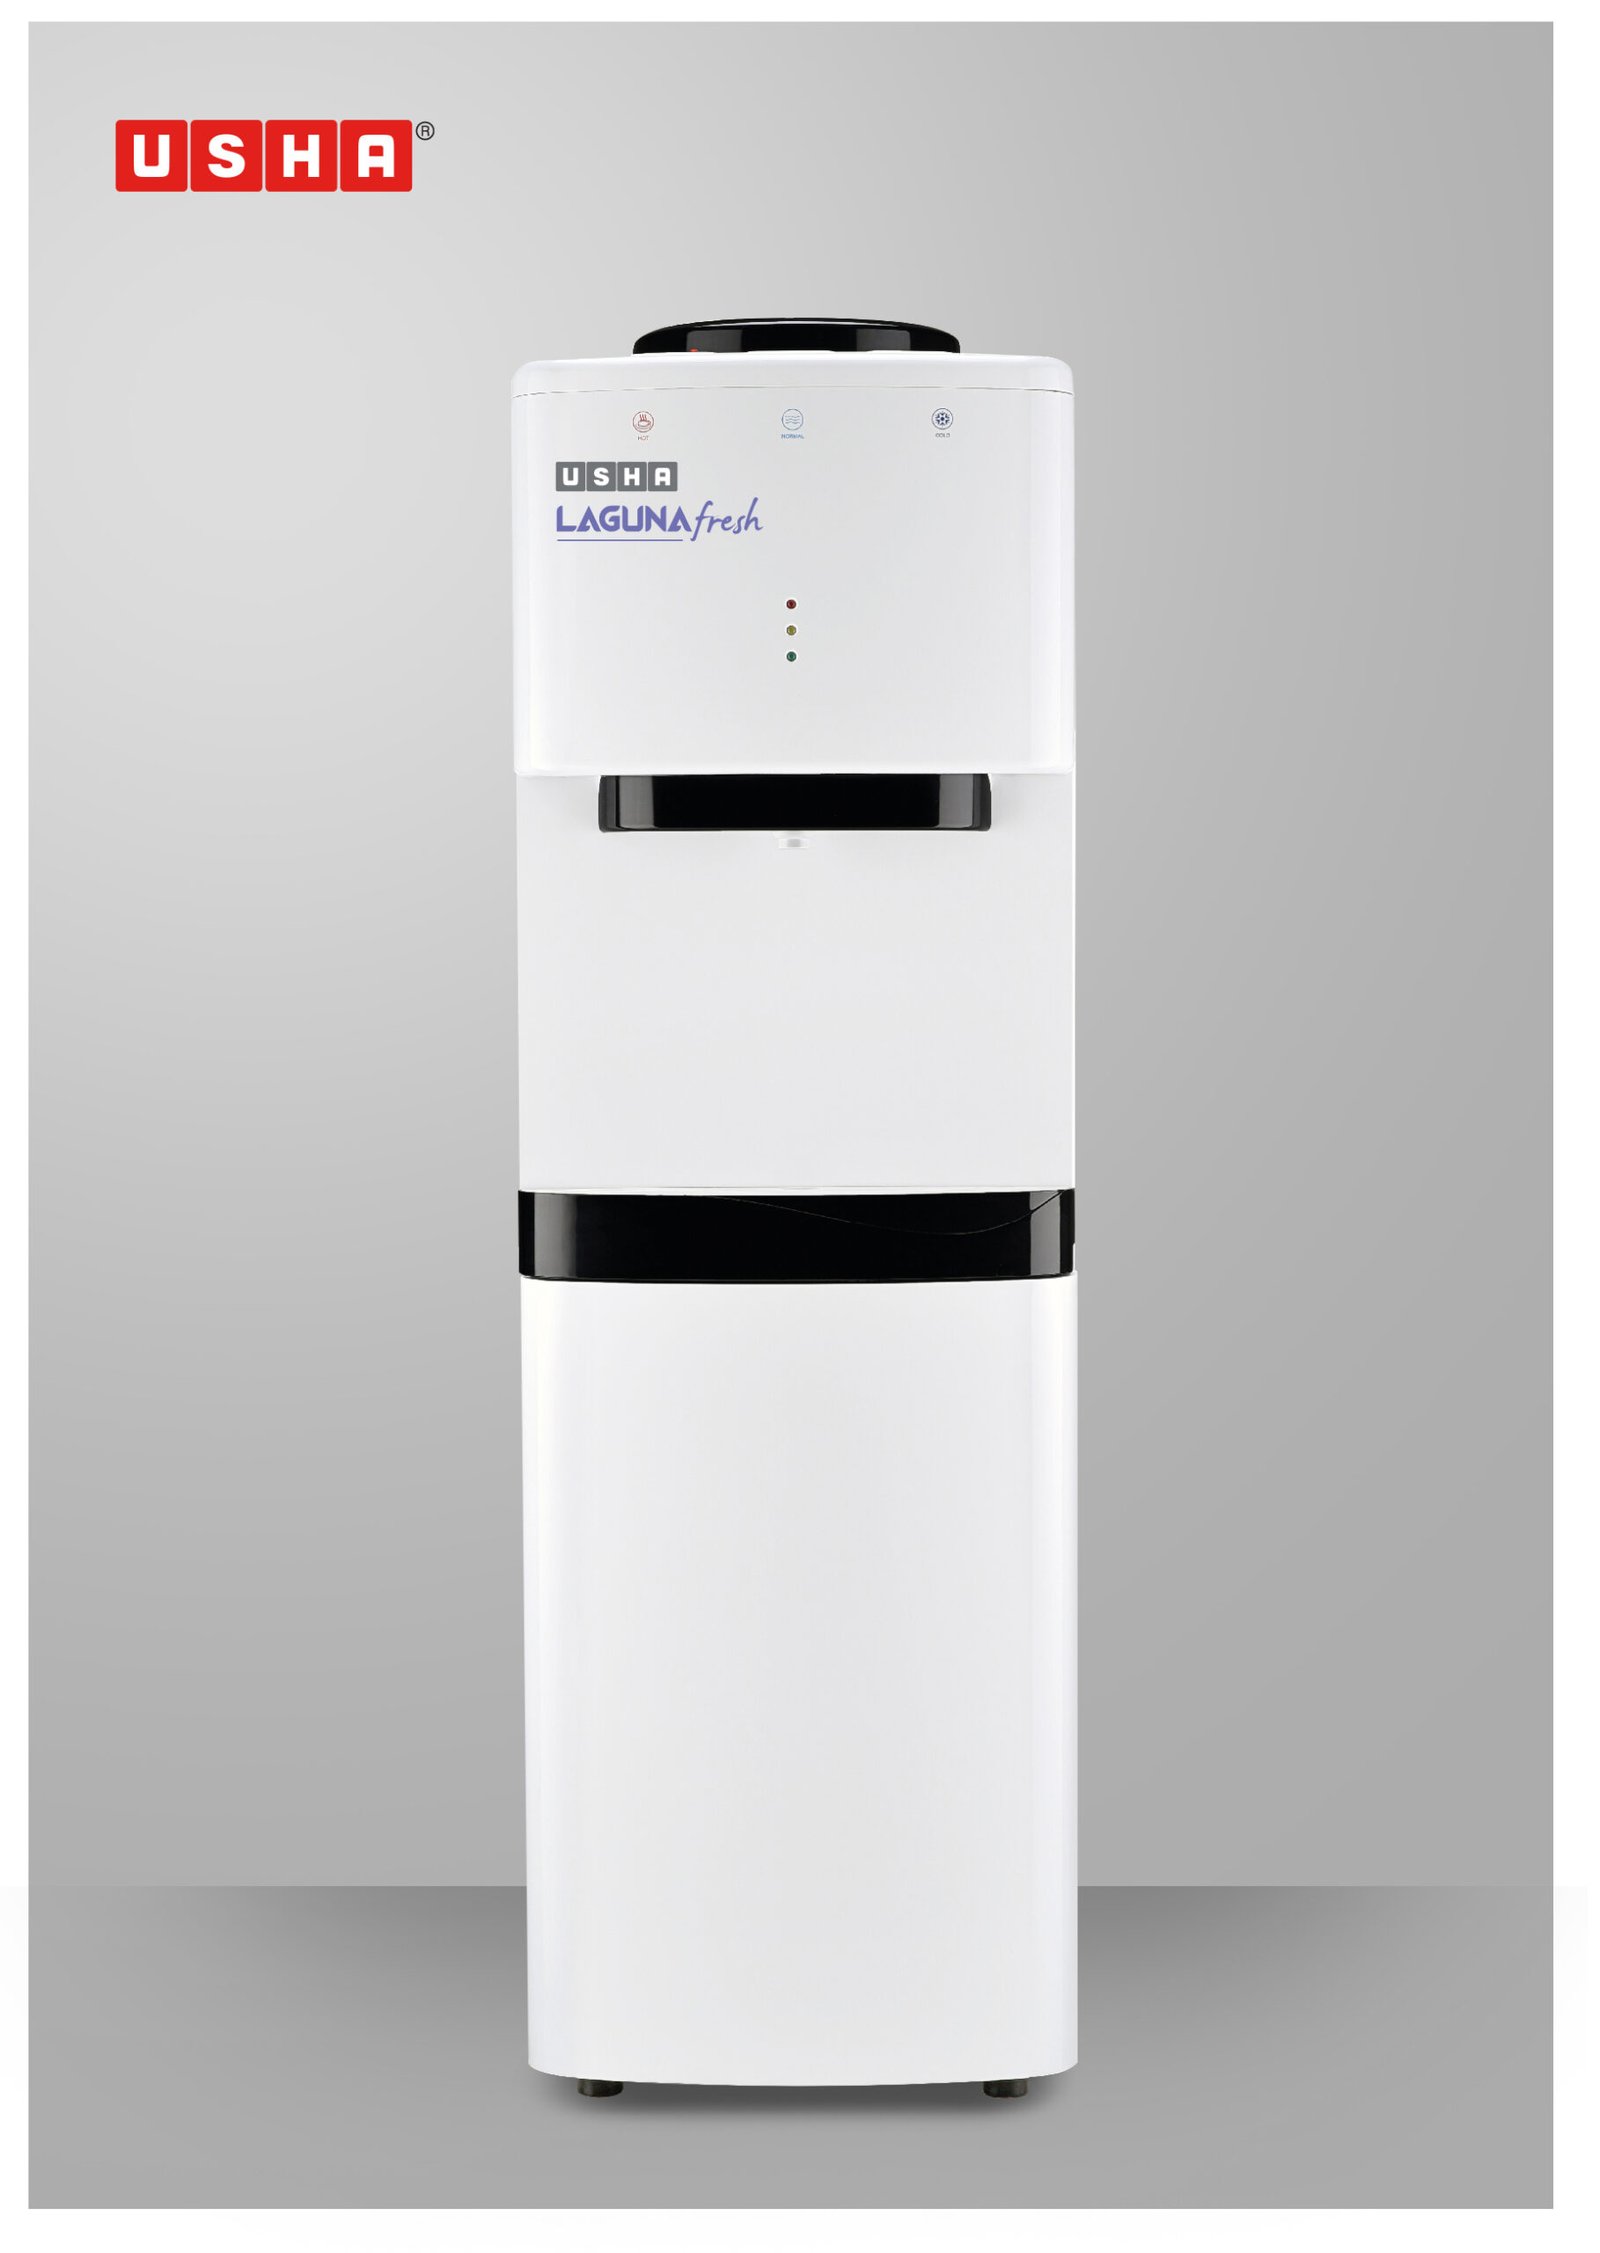 Usha introduces one-step water solution with LagunaFresh Water Dispenser Series